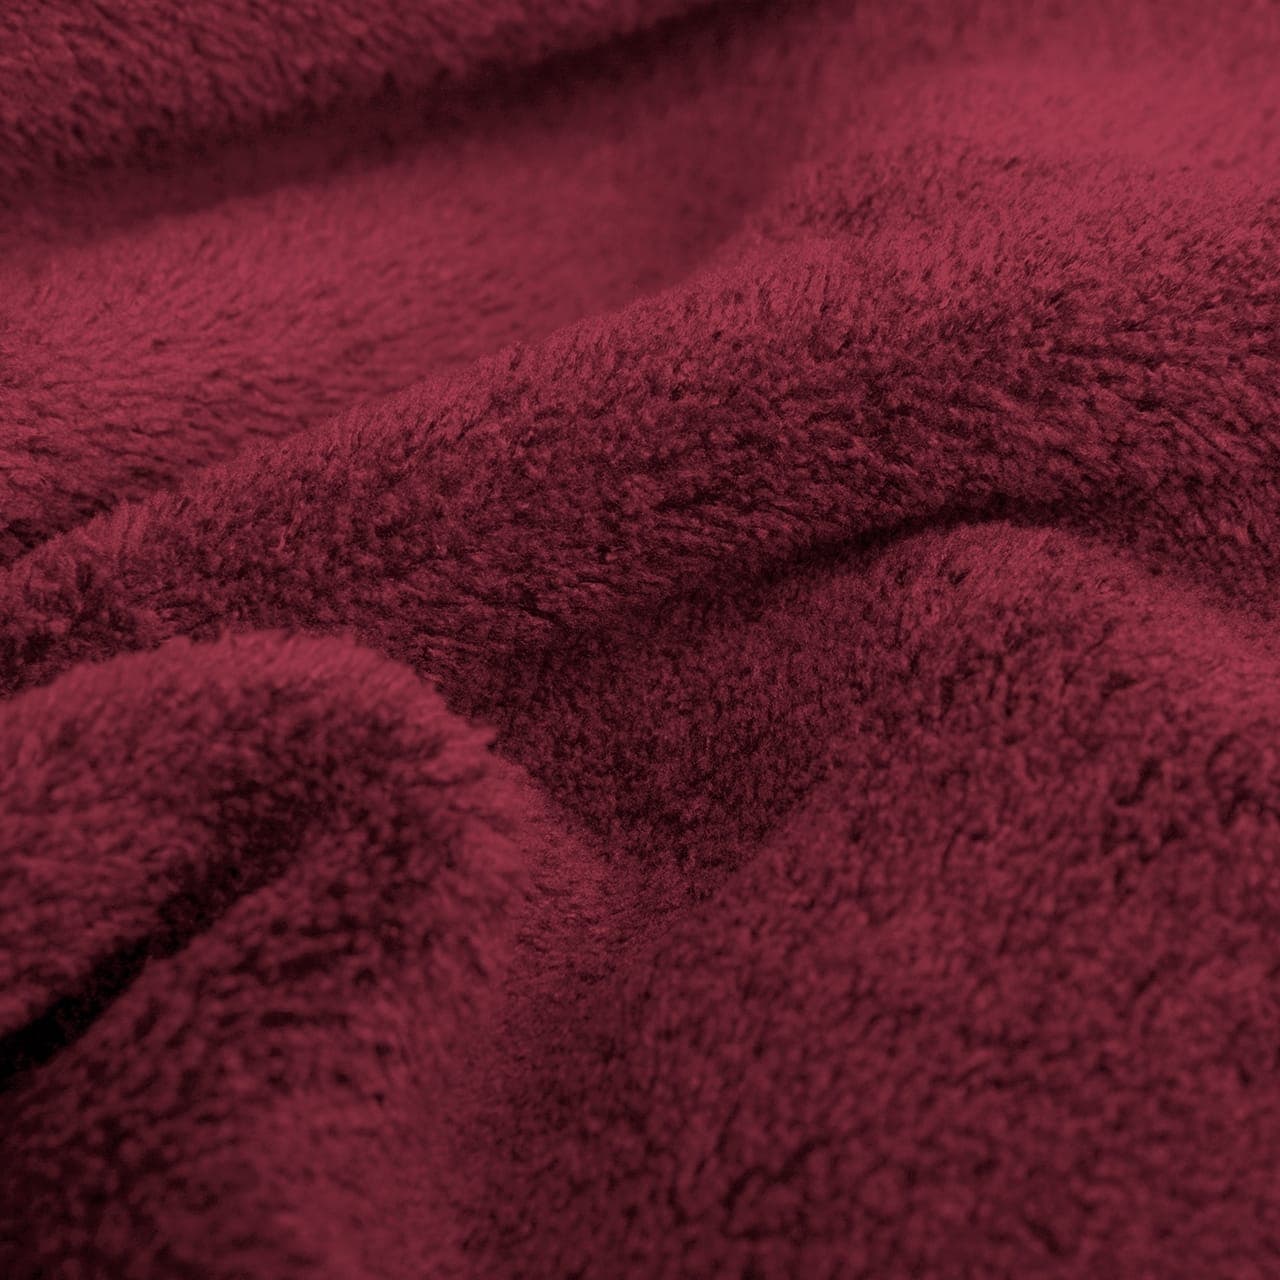 Snug-Rug DELUXE Blanket with Sleeves Mulberry Red